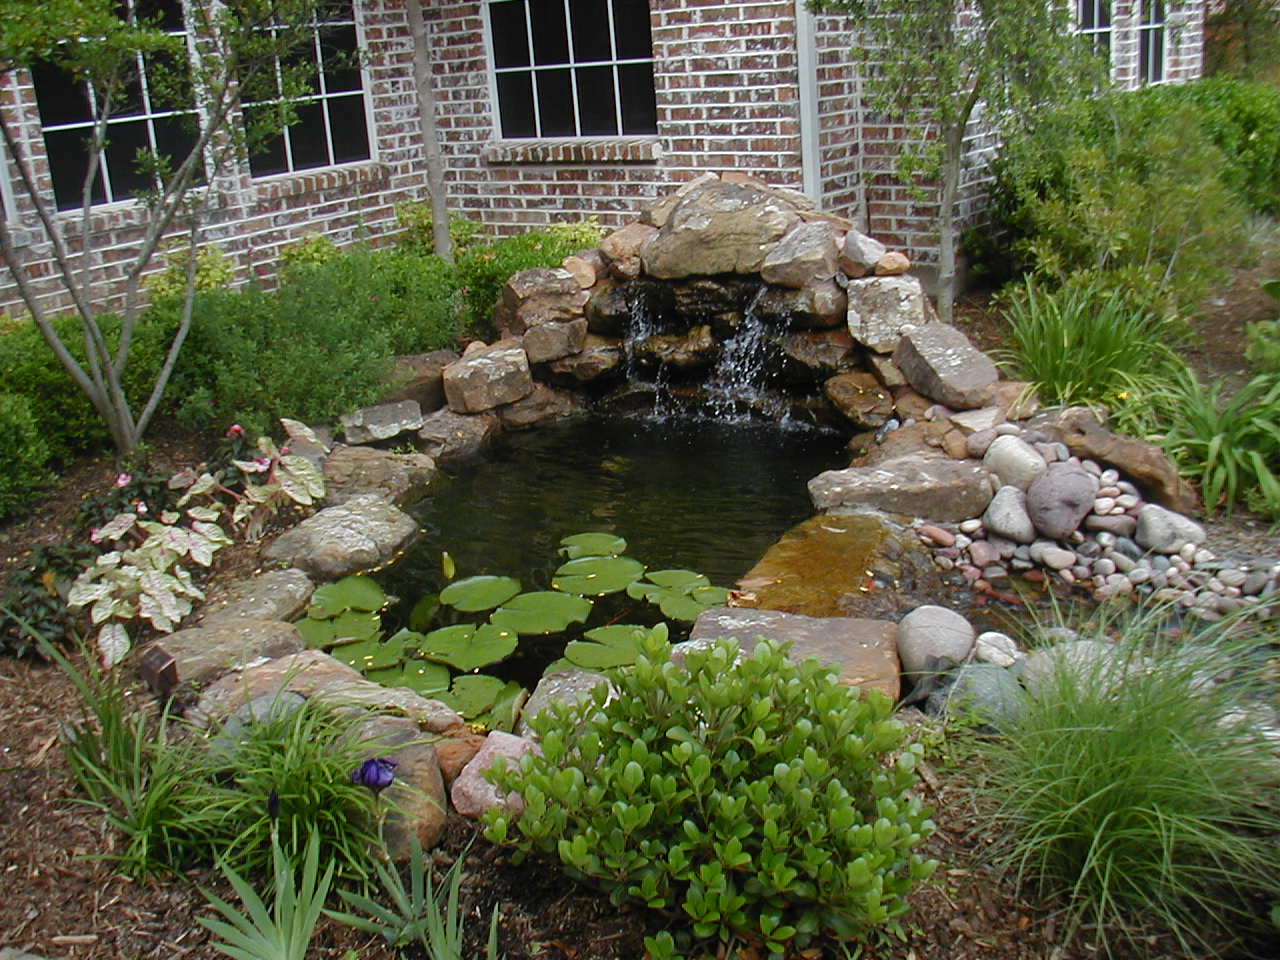 Garden Pond Also Beautiful Garden Pond With Waterfall Also Stone Line Idea Feat Pebbles Decoration And Native Plants Surround Decoration Wonderful Garden Pond Ideas With Koi Fish